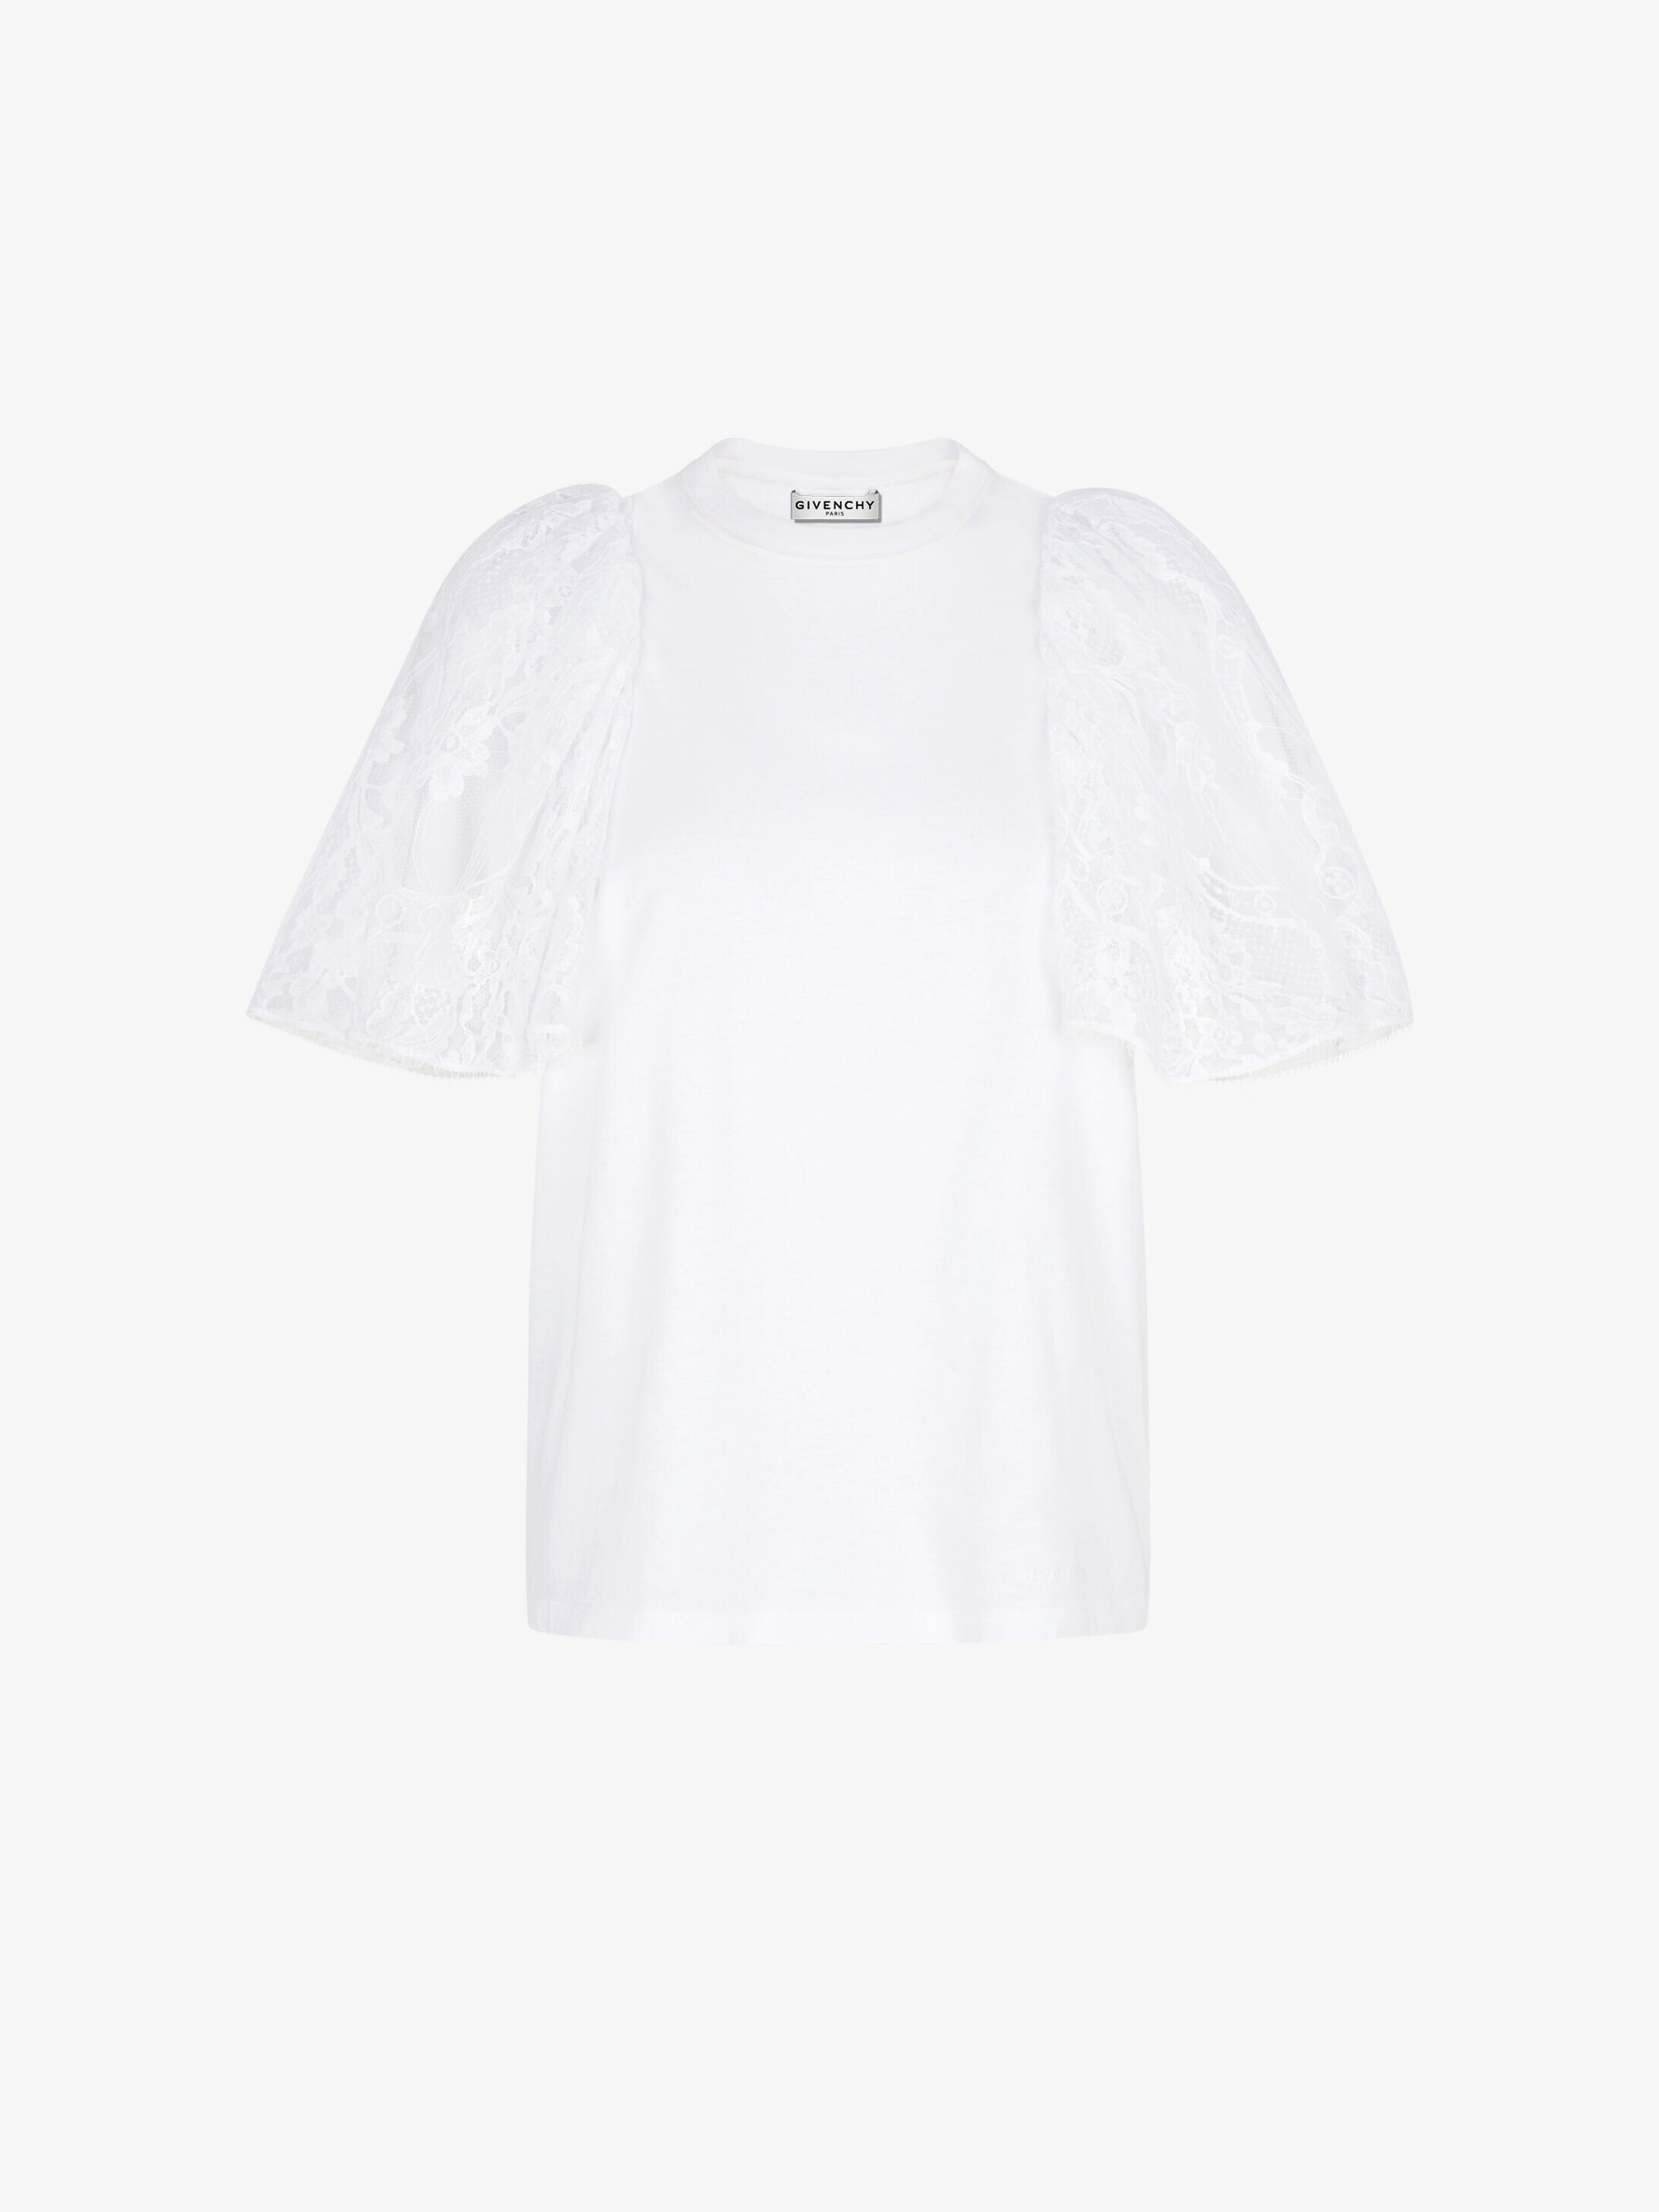 Women S T Shirts Collection By Givenchy Givenchy Paris